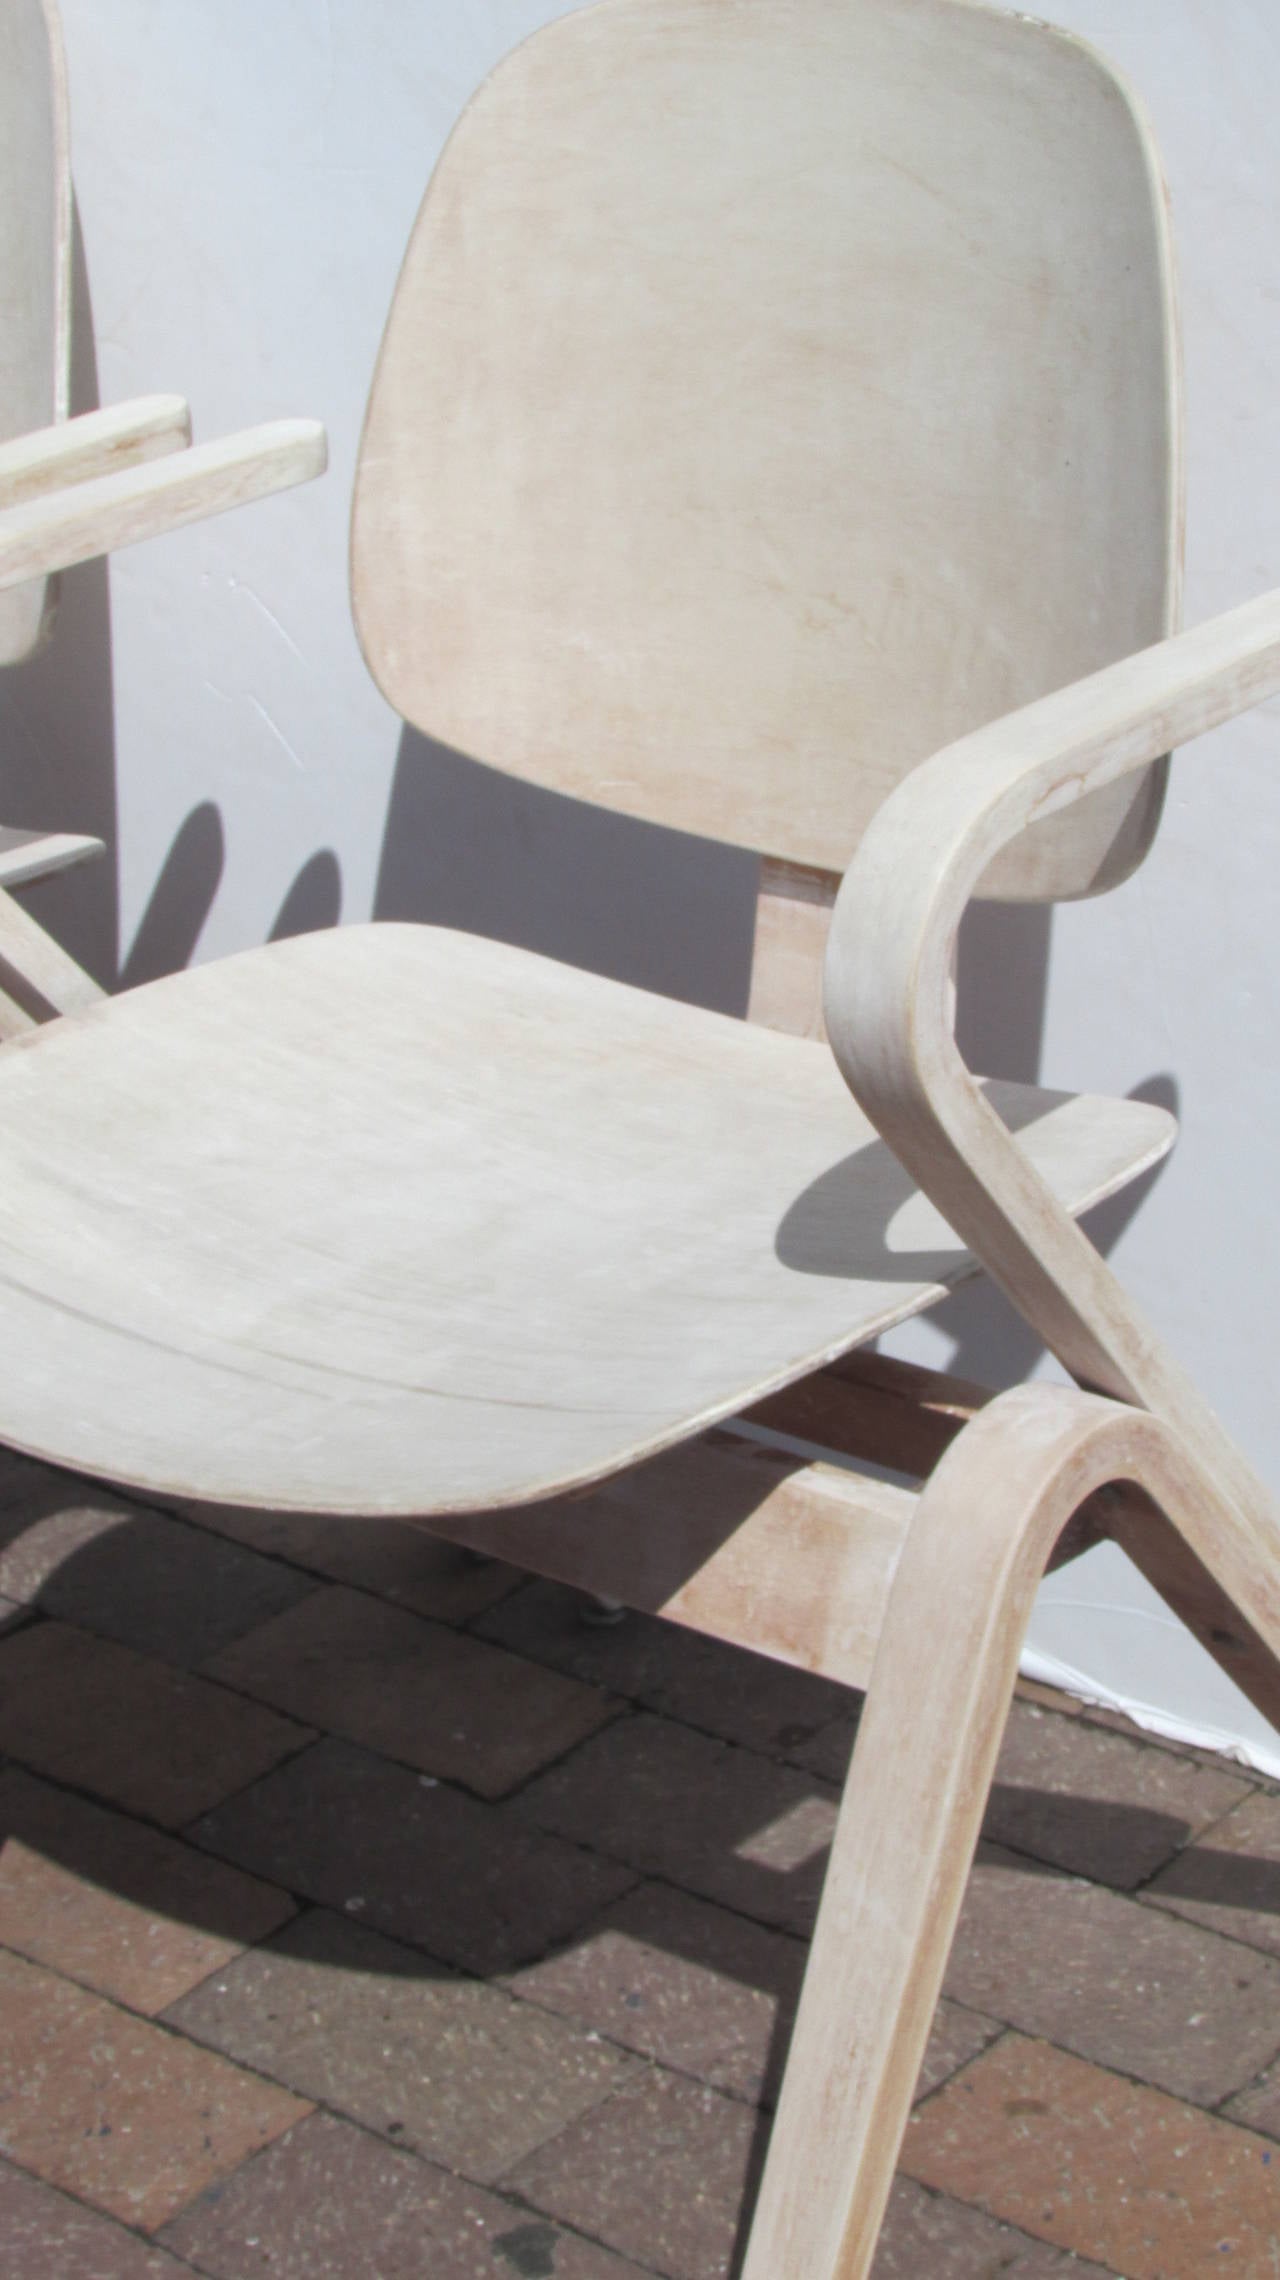 Bleached Thonet Bentwood Armchairs by Joe Atkinson ( 2 chairs sold - 2 chairs available )